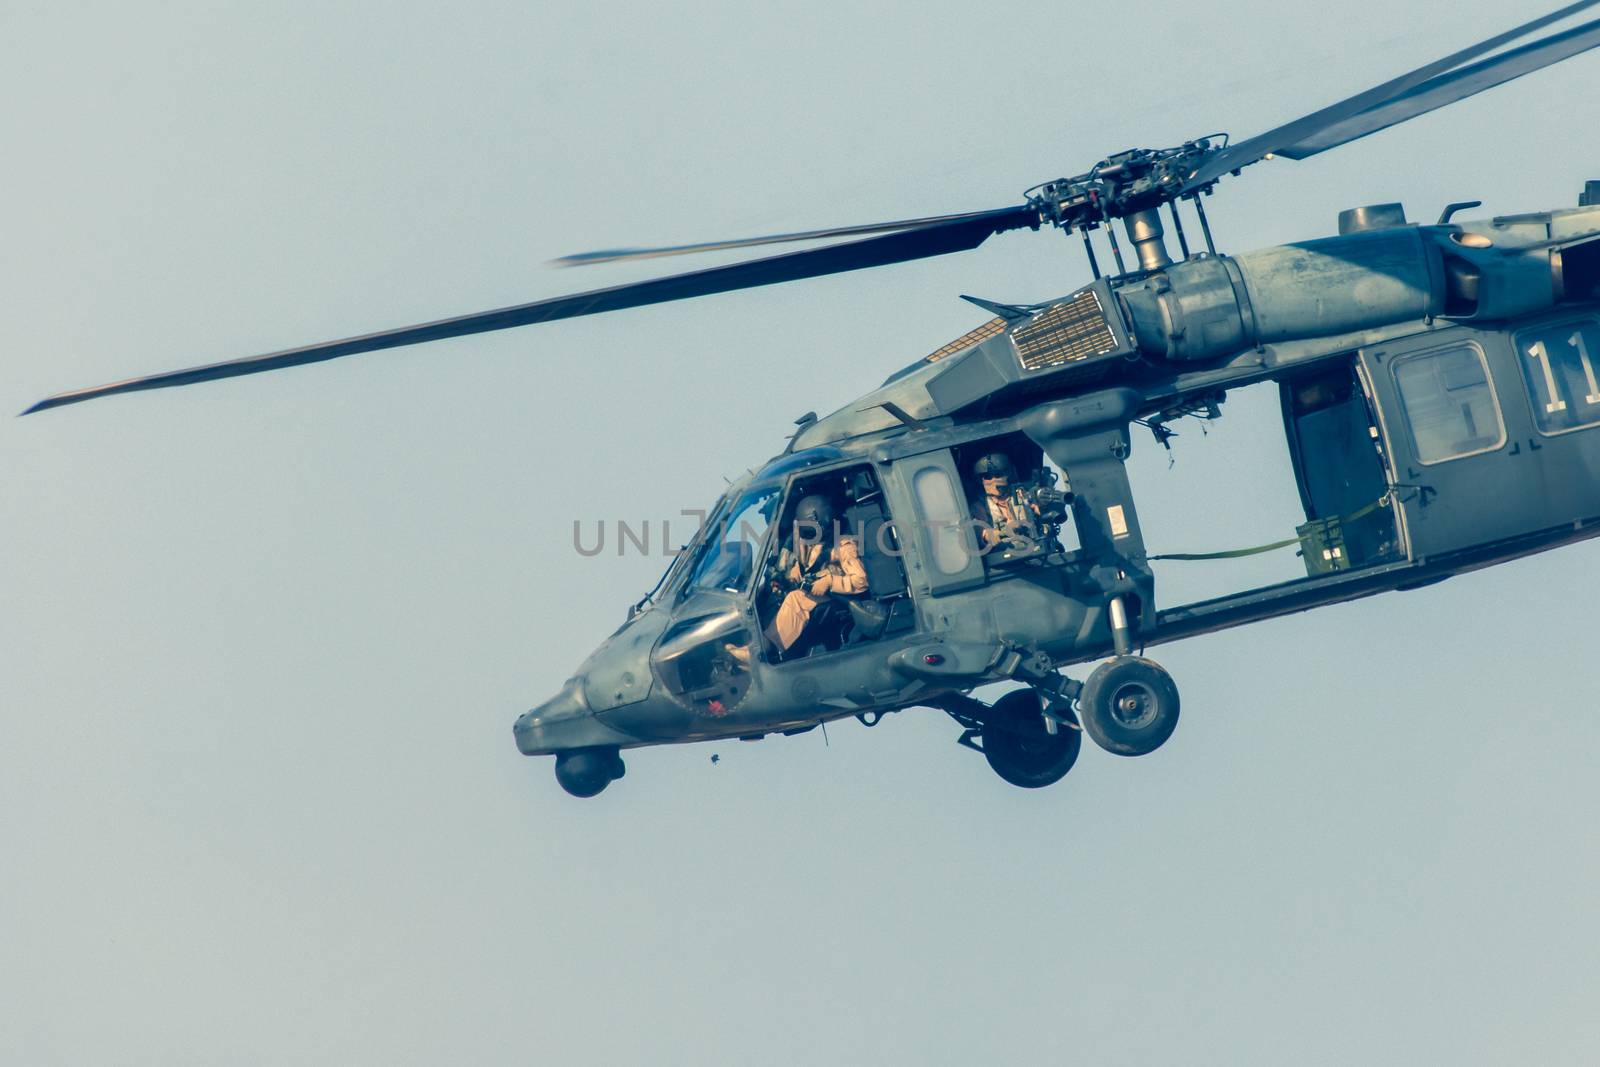 Military chopper close up shooting in war flies through the sky. Military concept of power, force, strength, air raid.